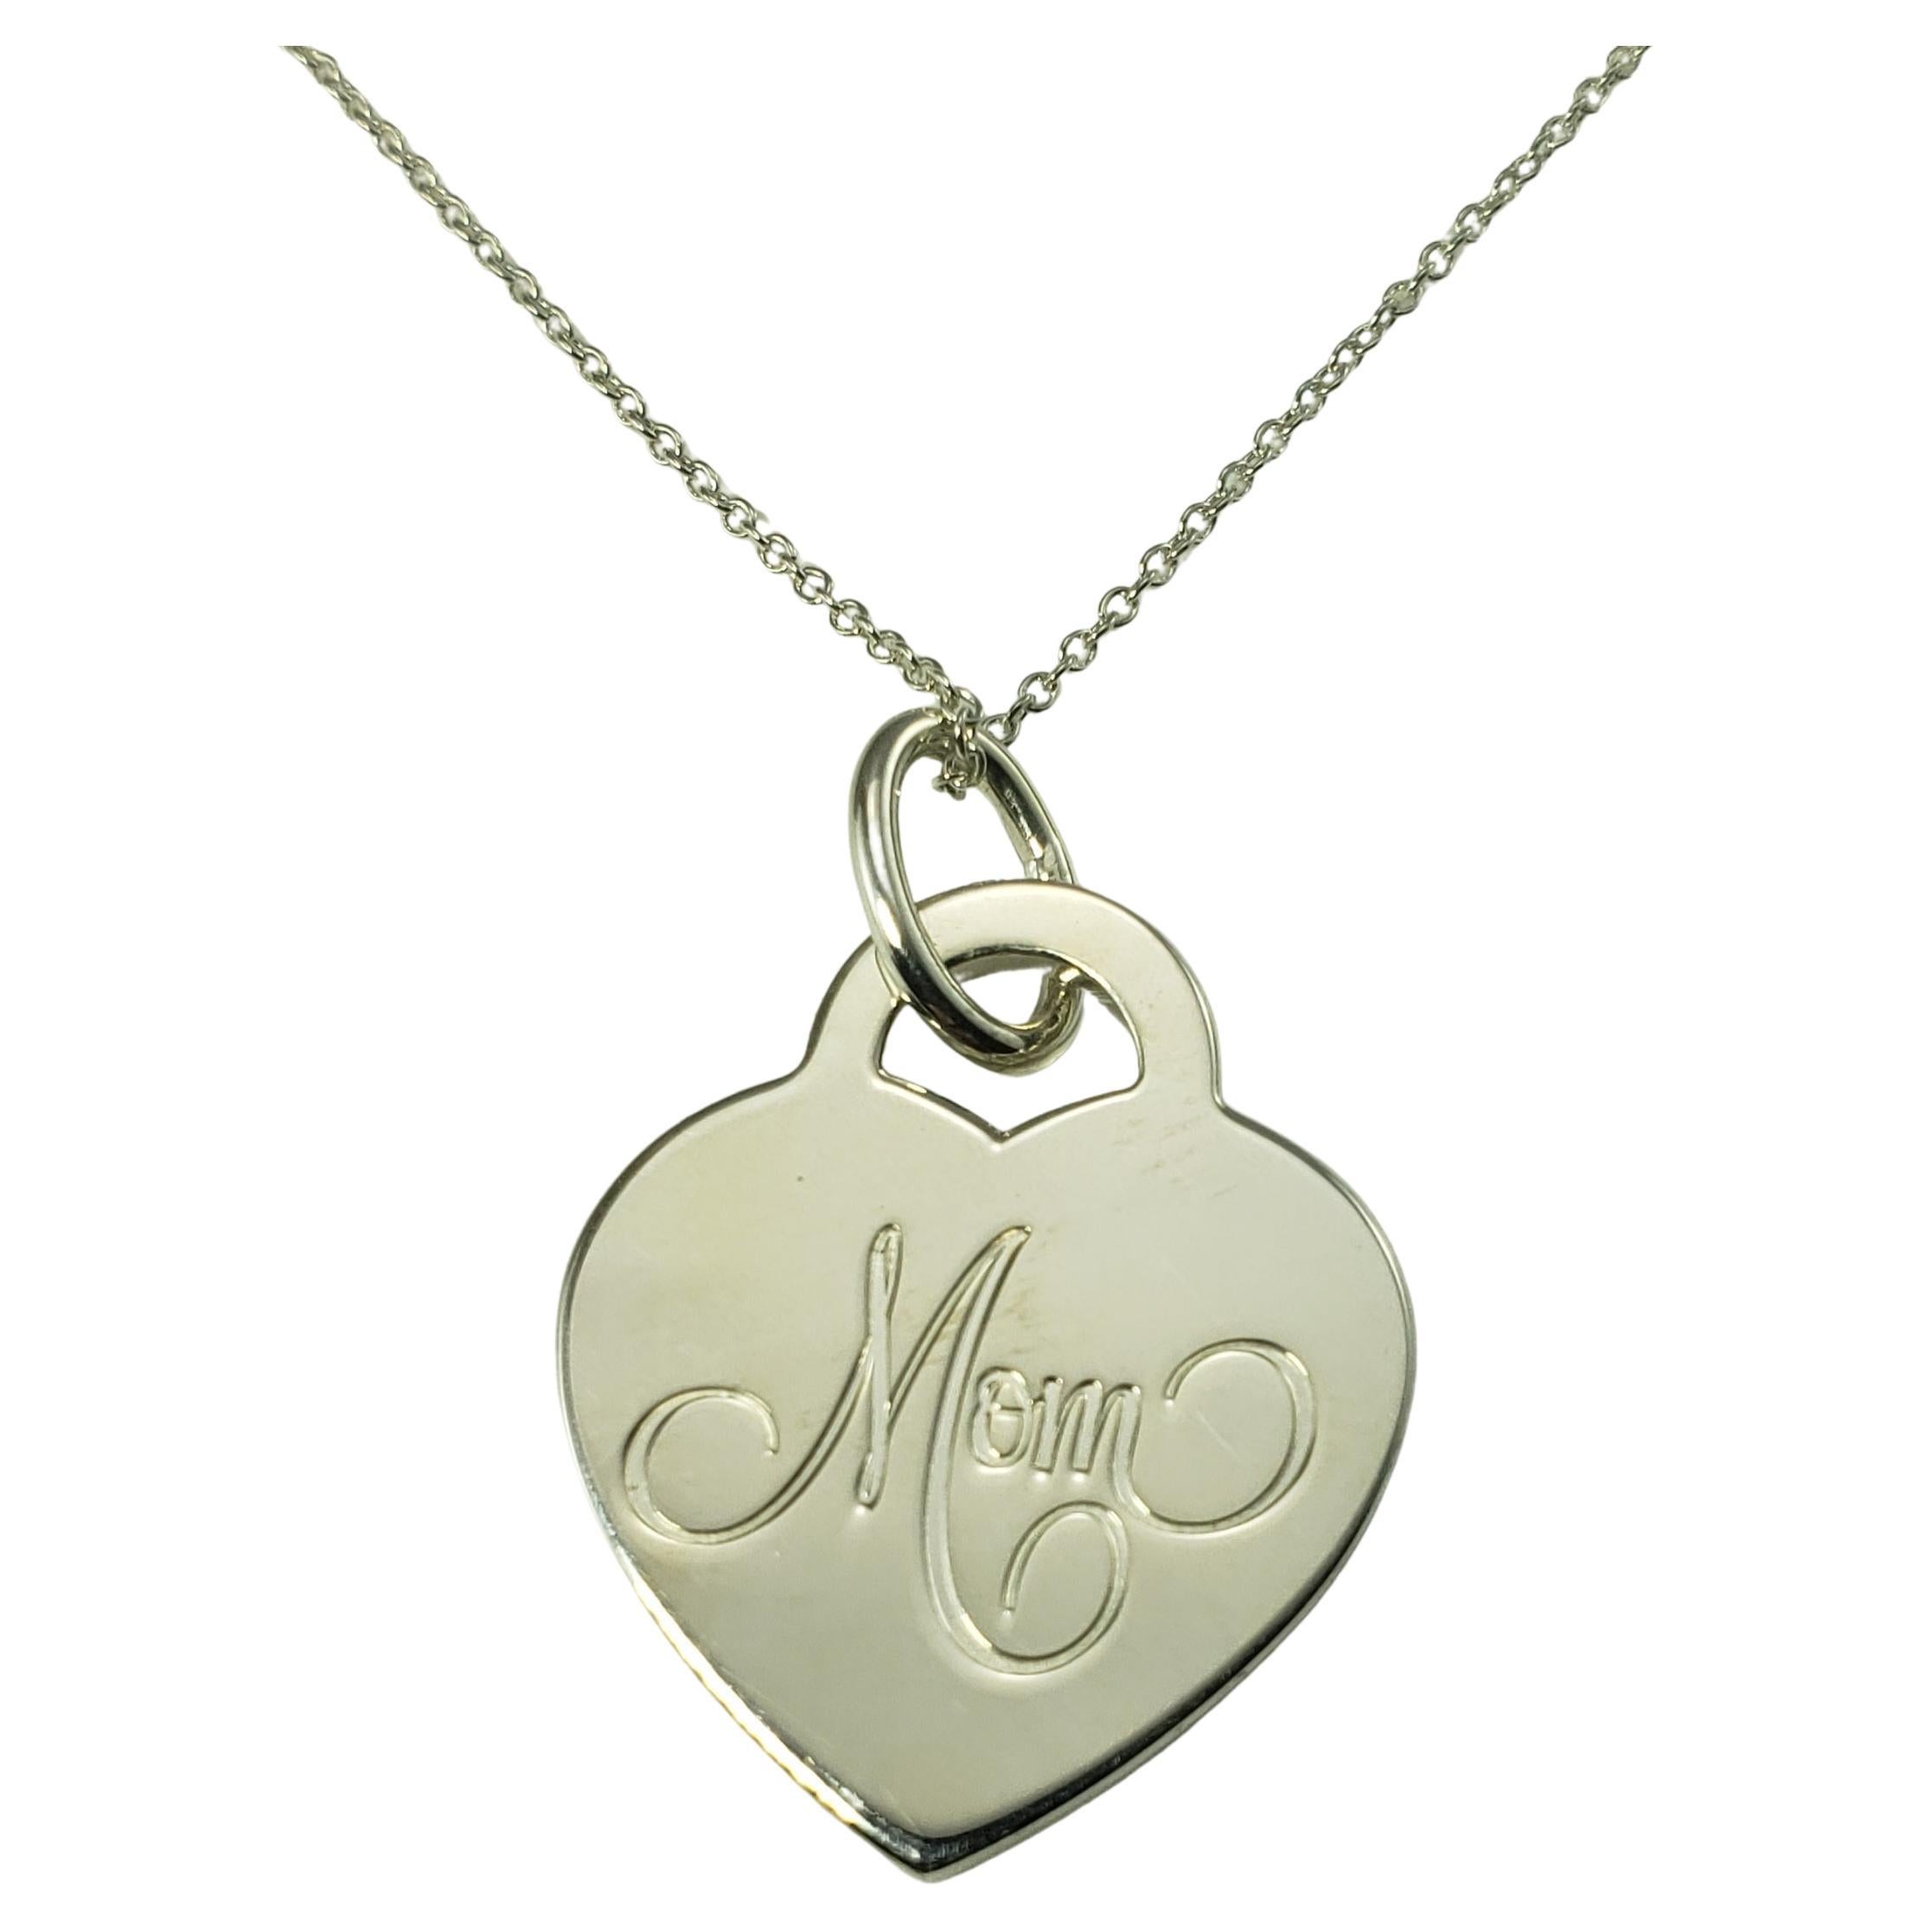 Tiffany & Co. Sterling Silver "Mom" Heart Pendant Necklace